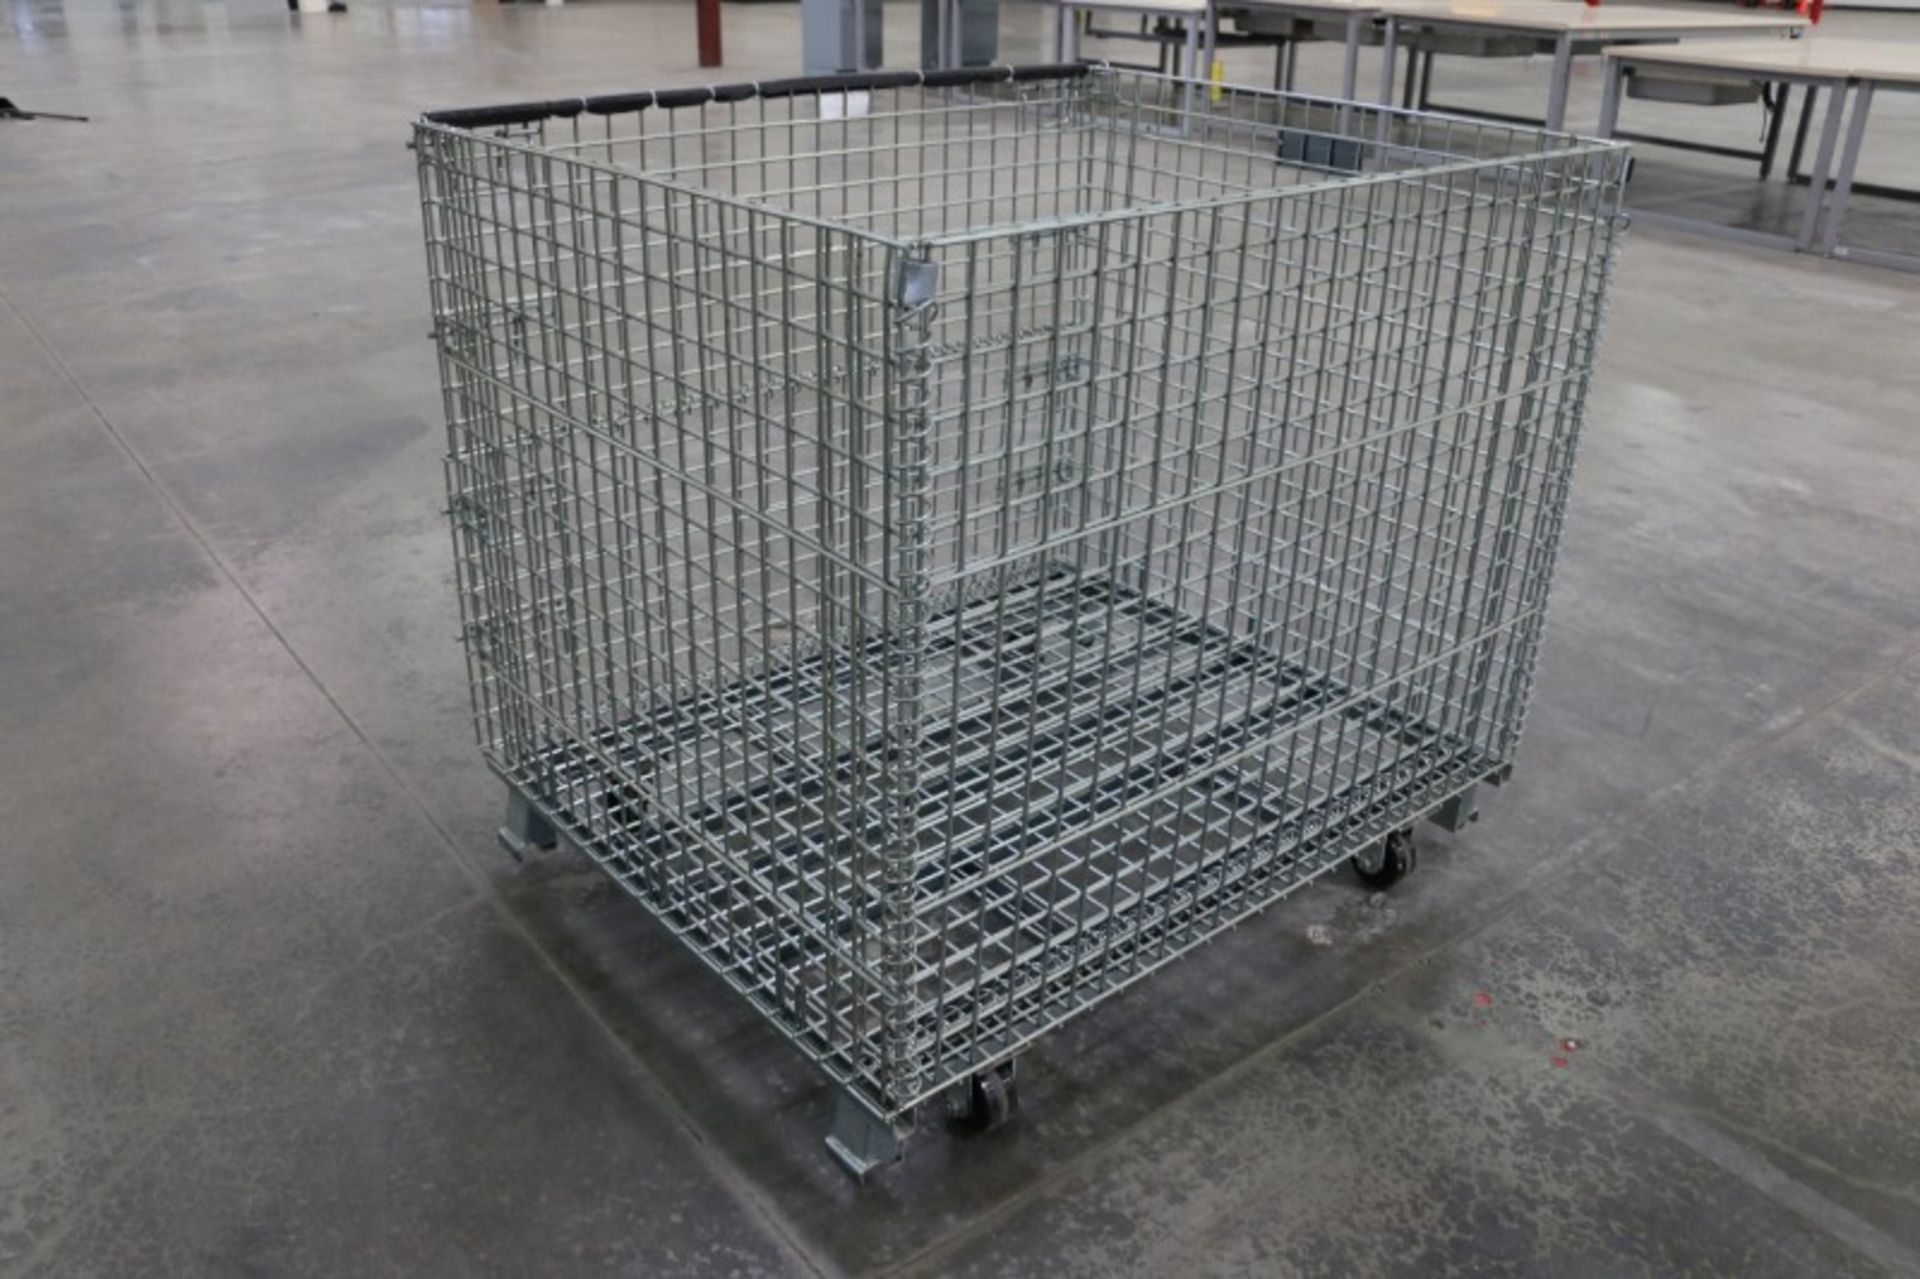 Rolling Wire Gaylord, 46"W x 39"L x 36"h, 2800lb capacity, collapsible - Image 2 of 3